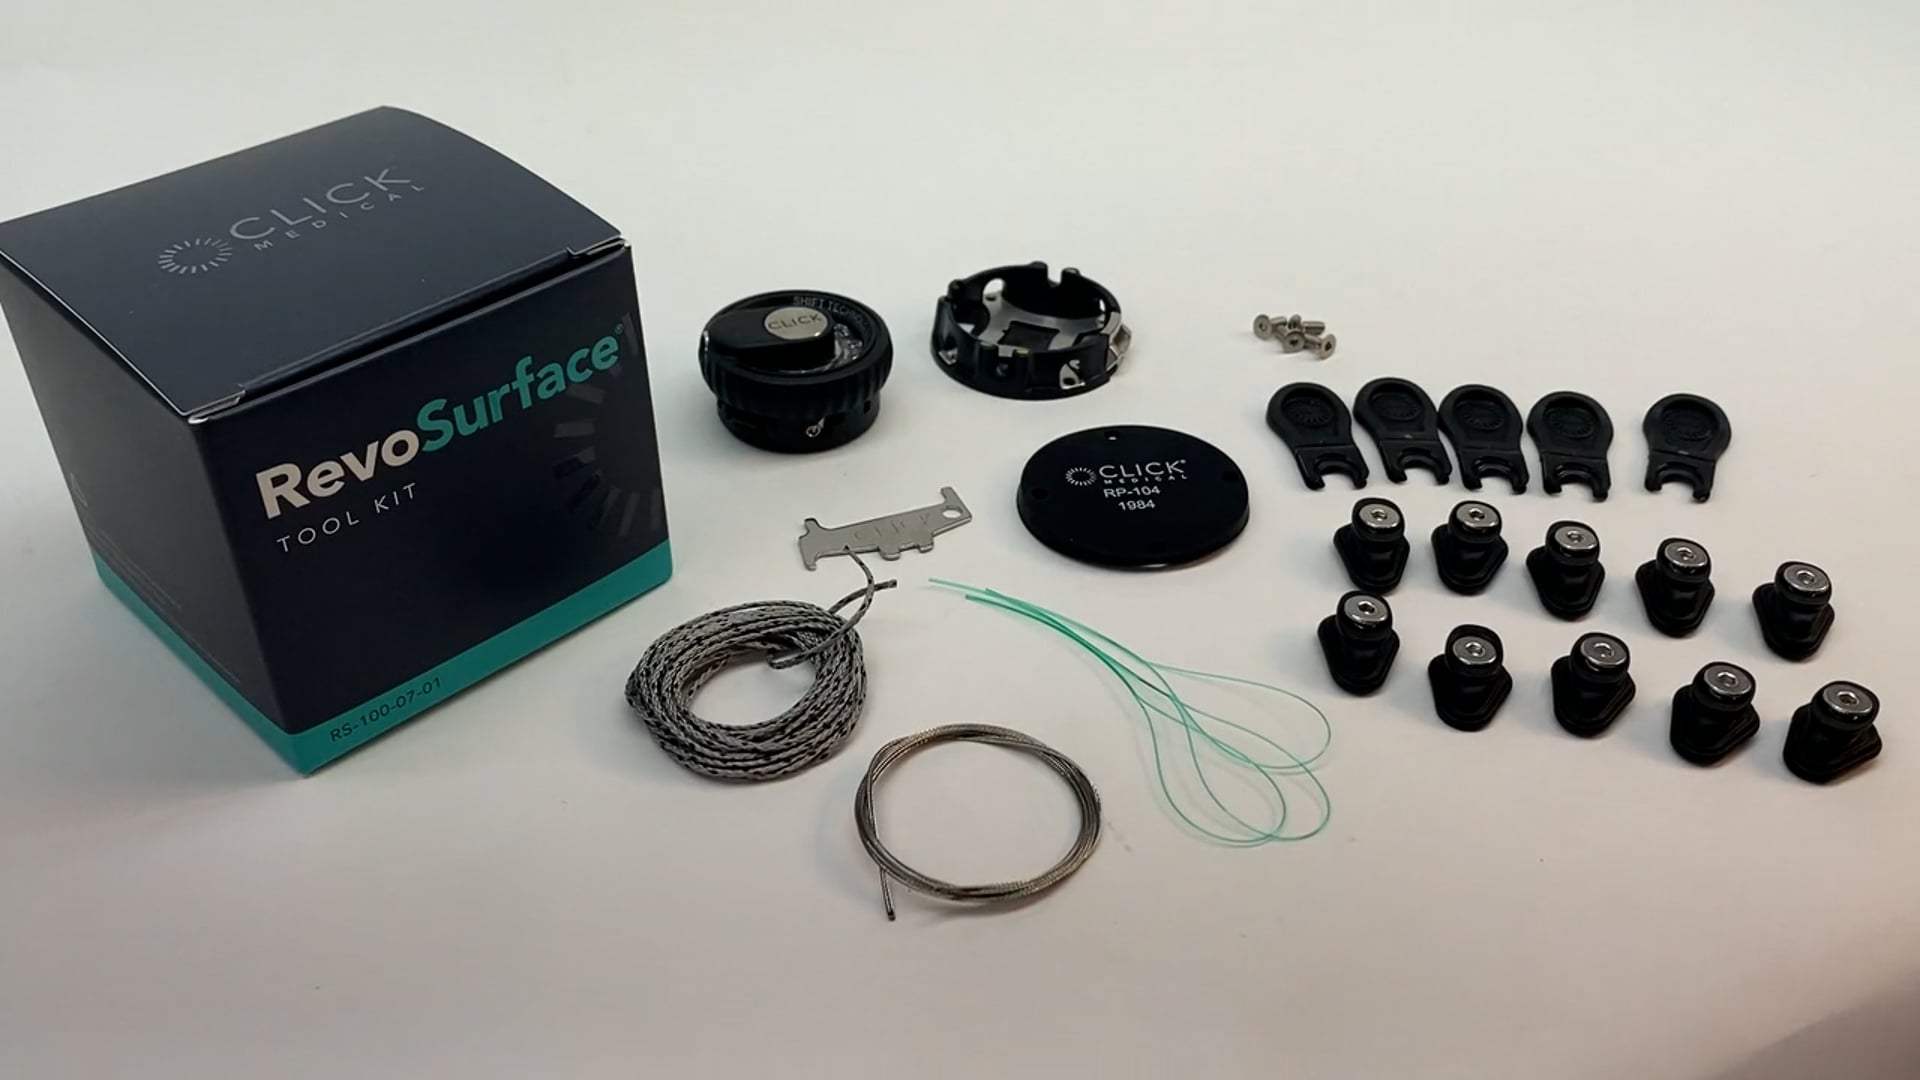 RevoSurface Tool Kit Overview